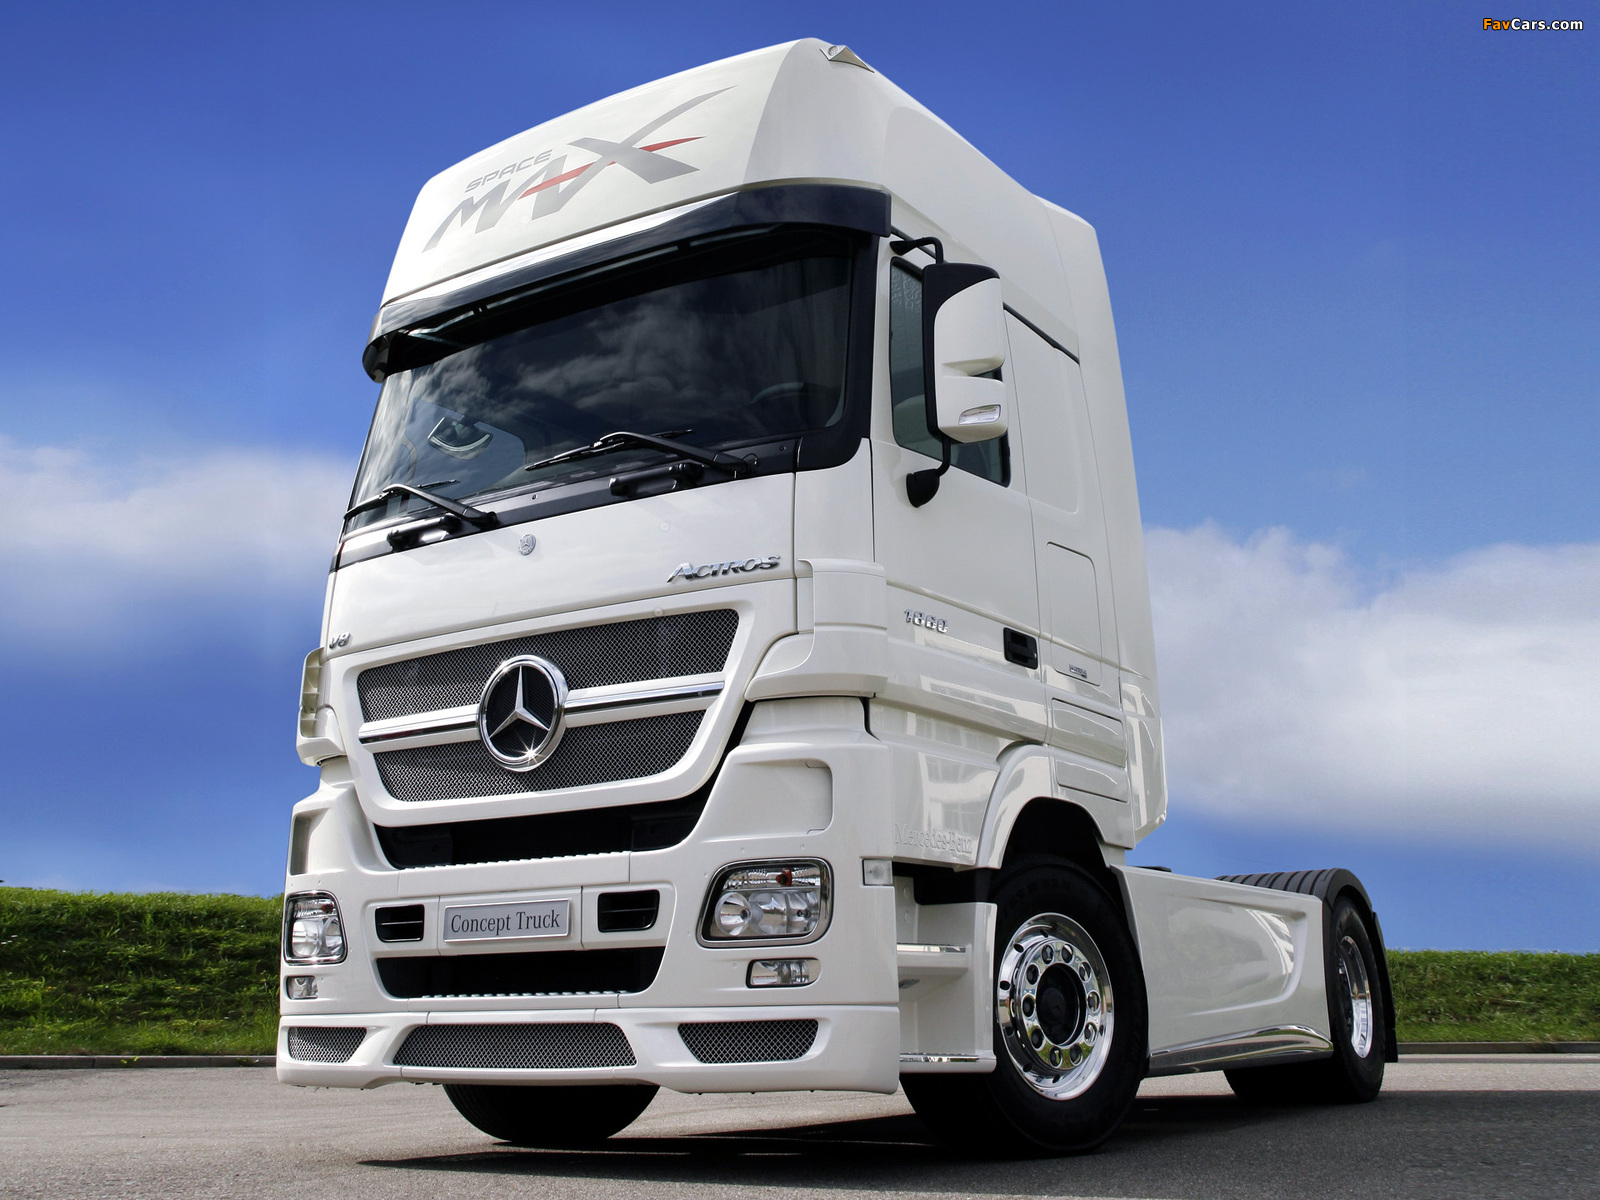 Mercedes-Benz Actros 1860 Study Space Max Concept (MP2) 2006 pictures  (1600x1200)